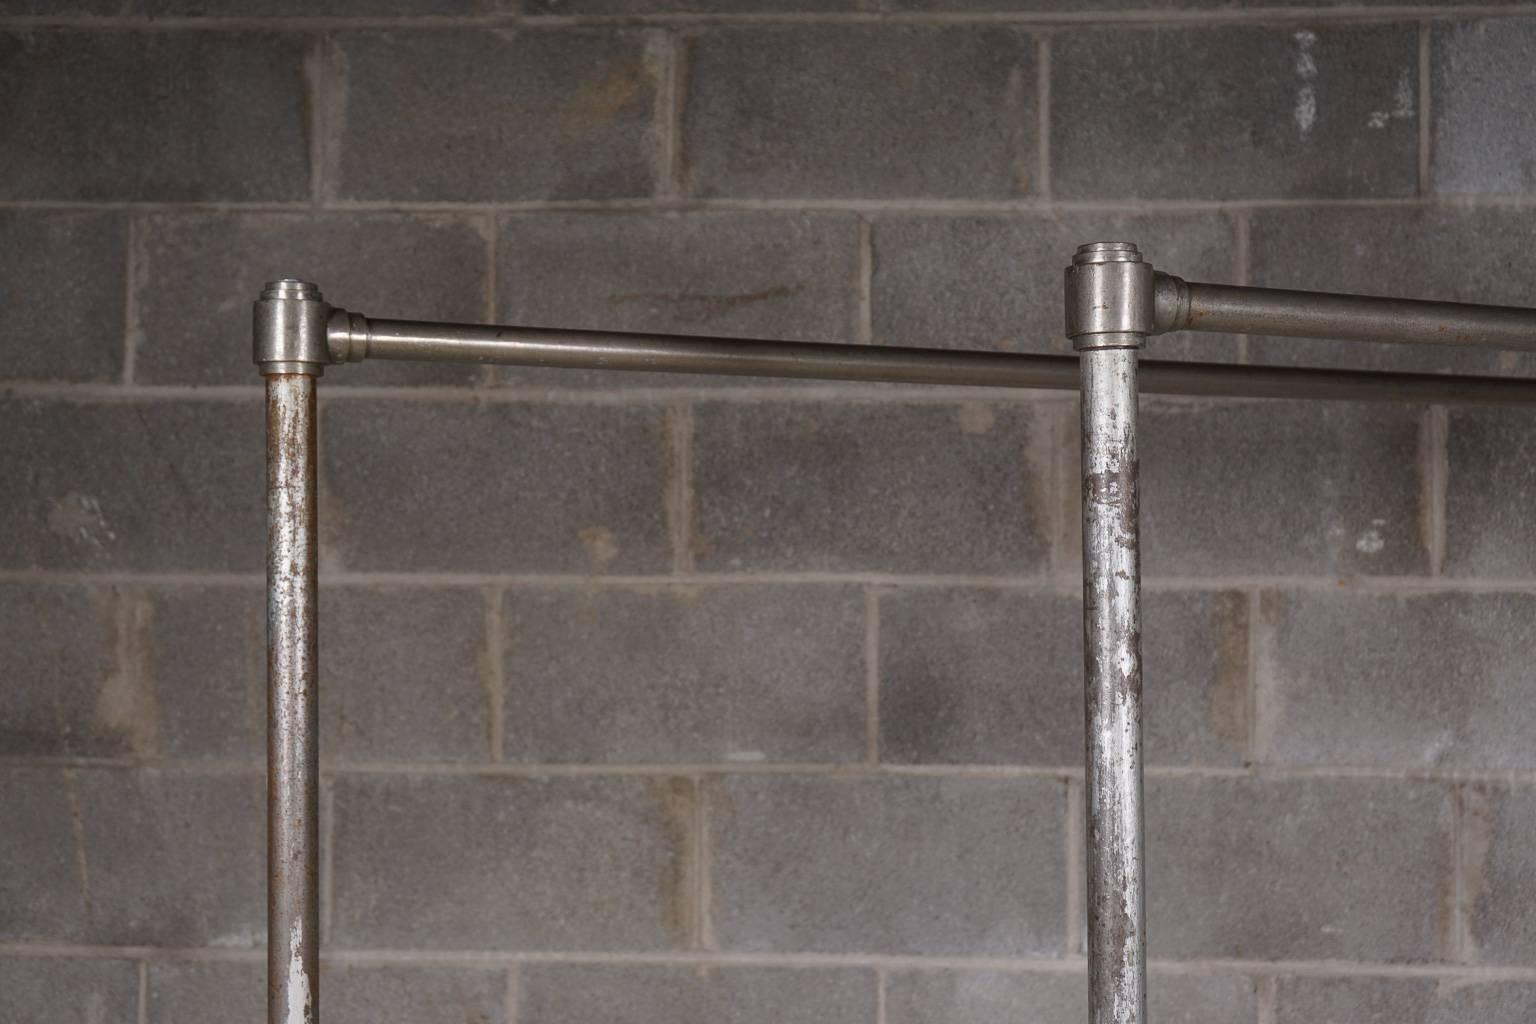 Pair of metal clothing racks from France. Running casters.